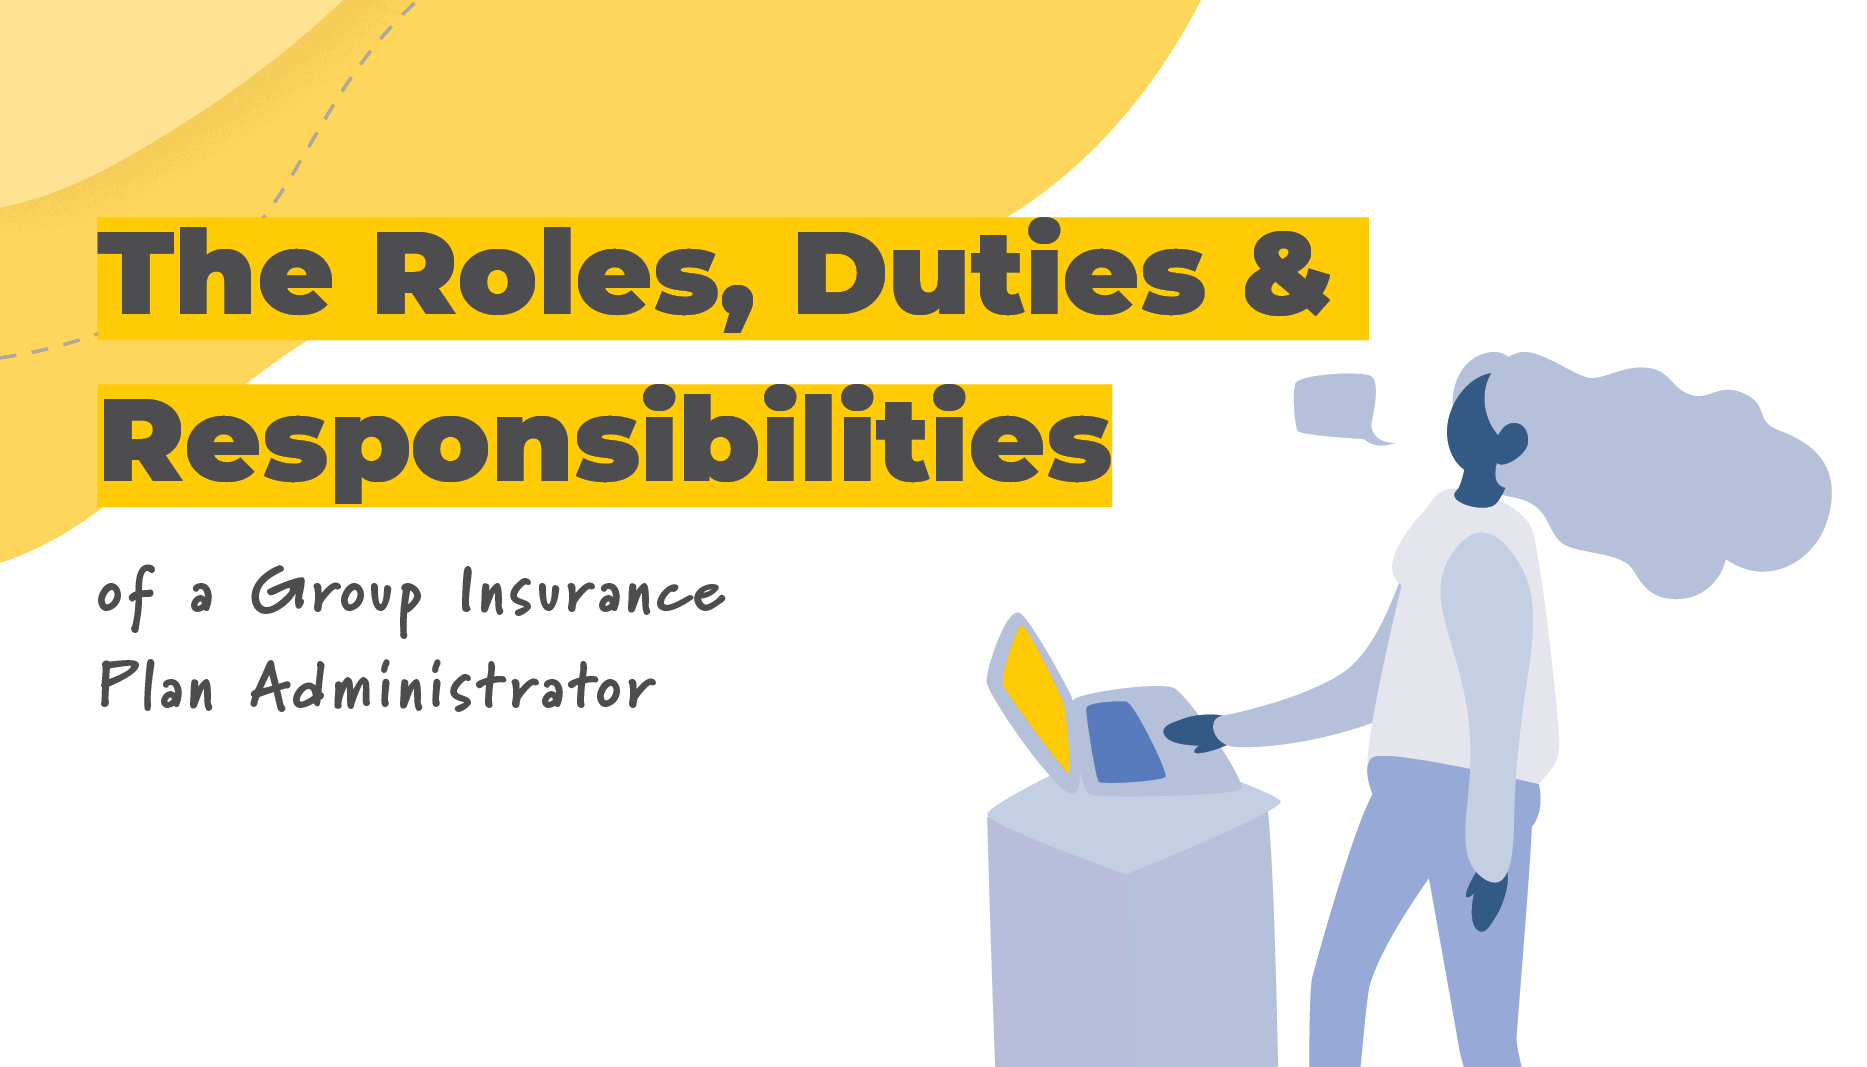 The Roles, Duties & Responsibilities of a Group Insurance Plan Administrator